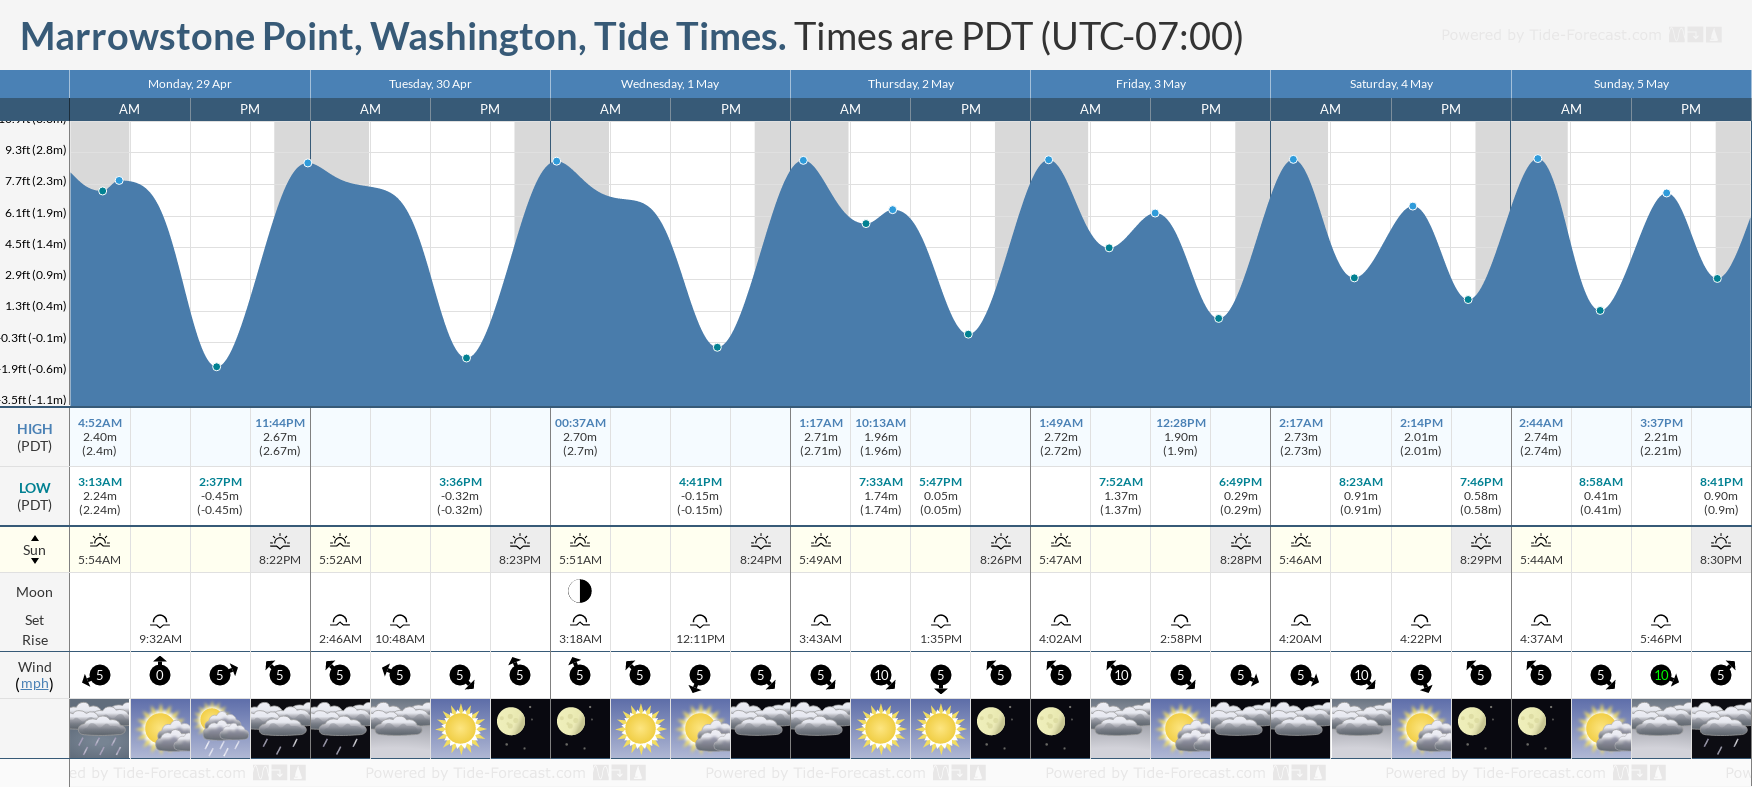 Marrowstone Point, Washington Tide Chart including high and low tide tide times for the next 7 days